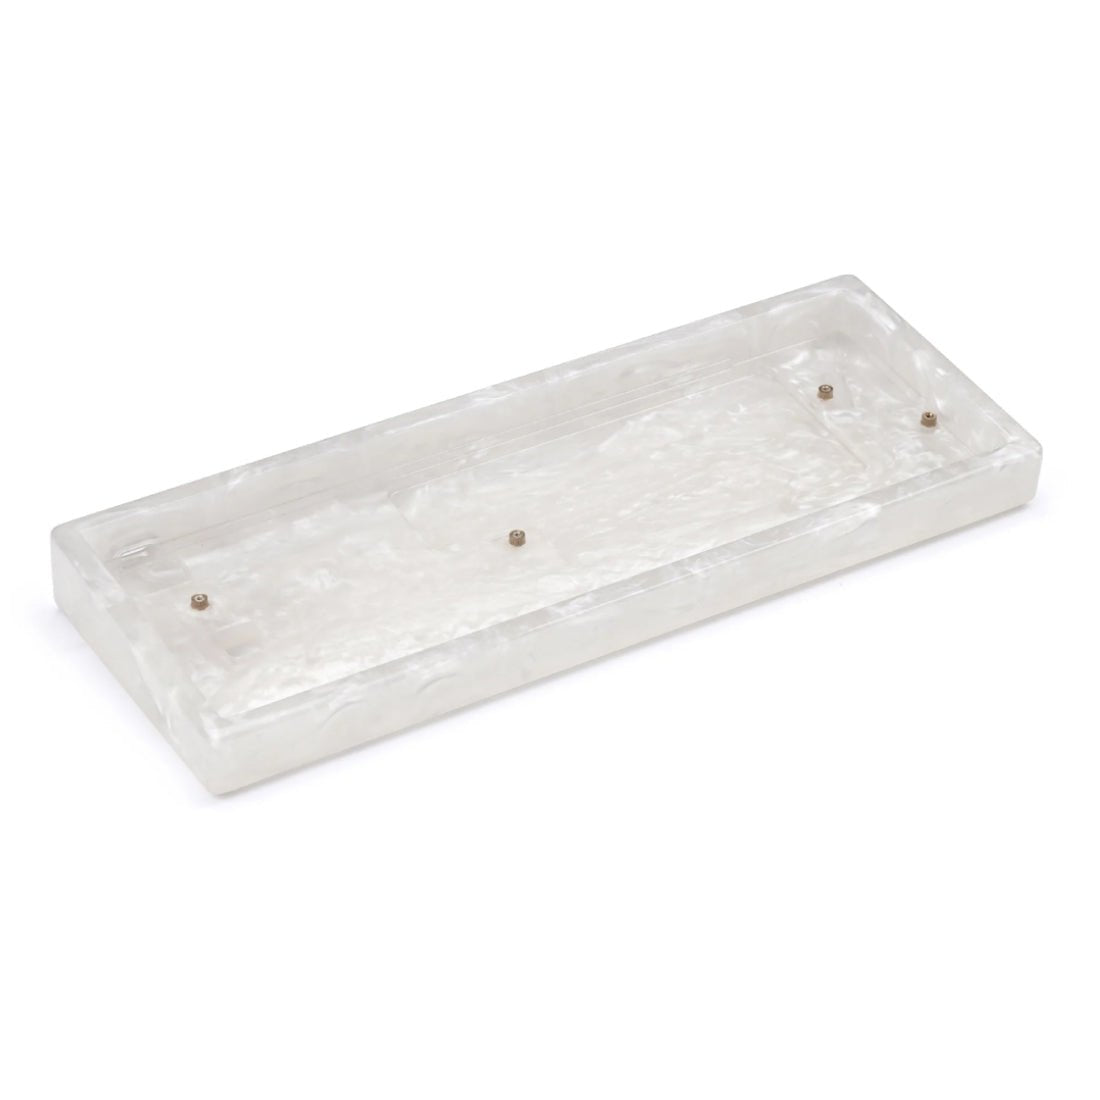 Alopow 60% Resin Case For Custom Mechanical Keyboard - Alabaster White - Store 974 | ستور ٩٧٤